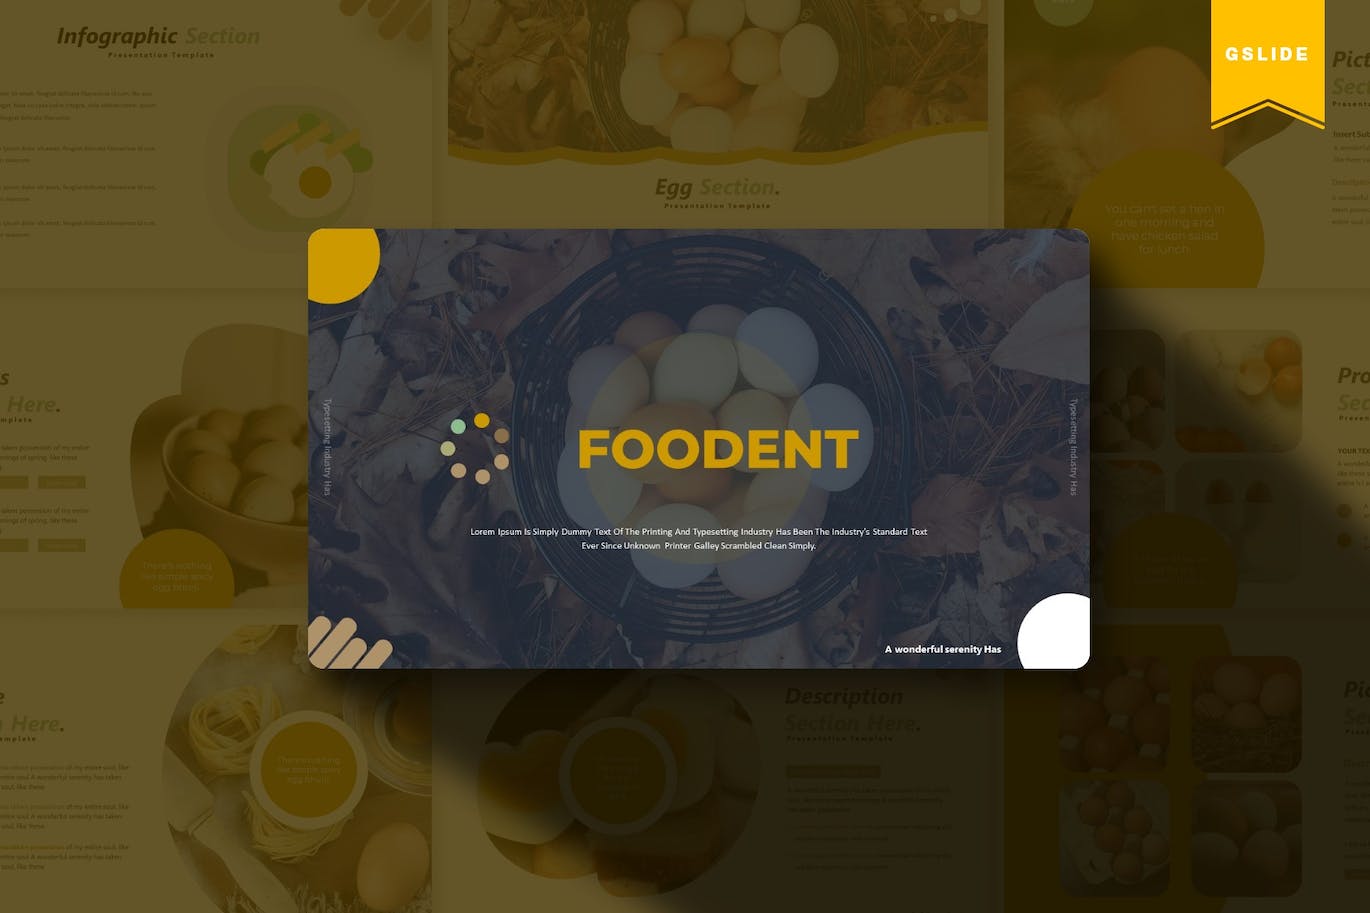 A selection of images of amazing food-themed presentation slides.